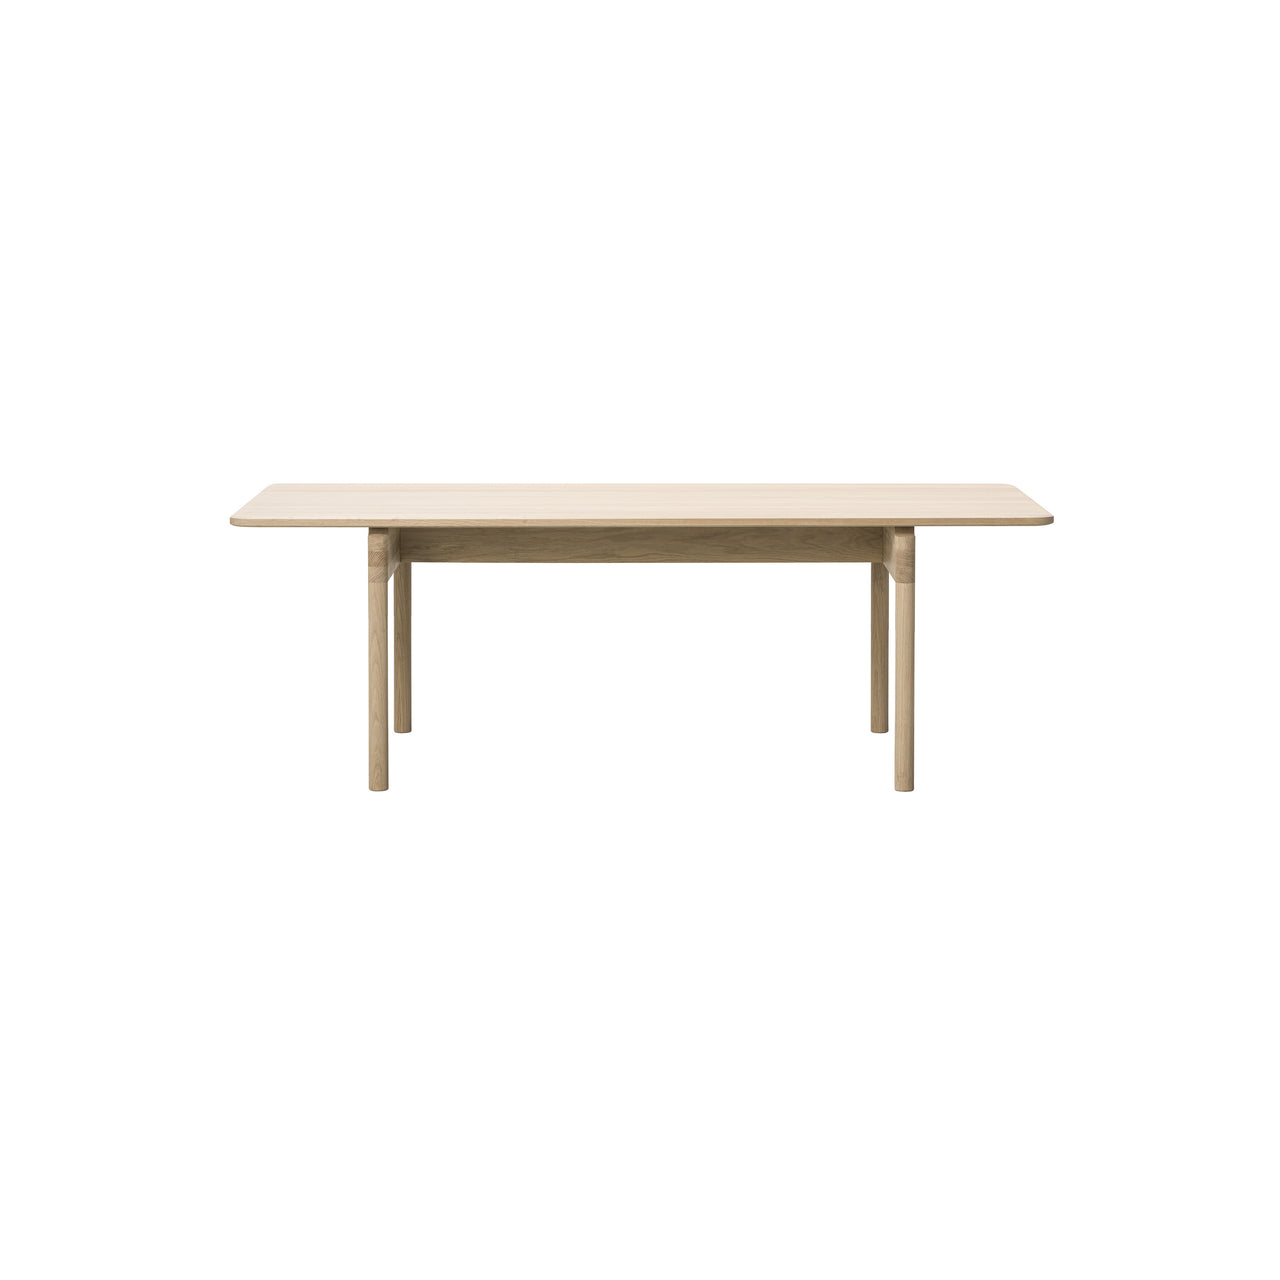 Post Dining Table: Small - 88.6